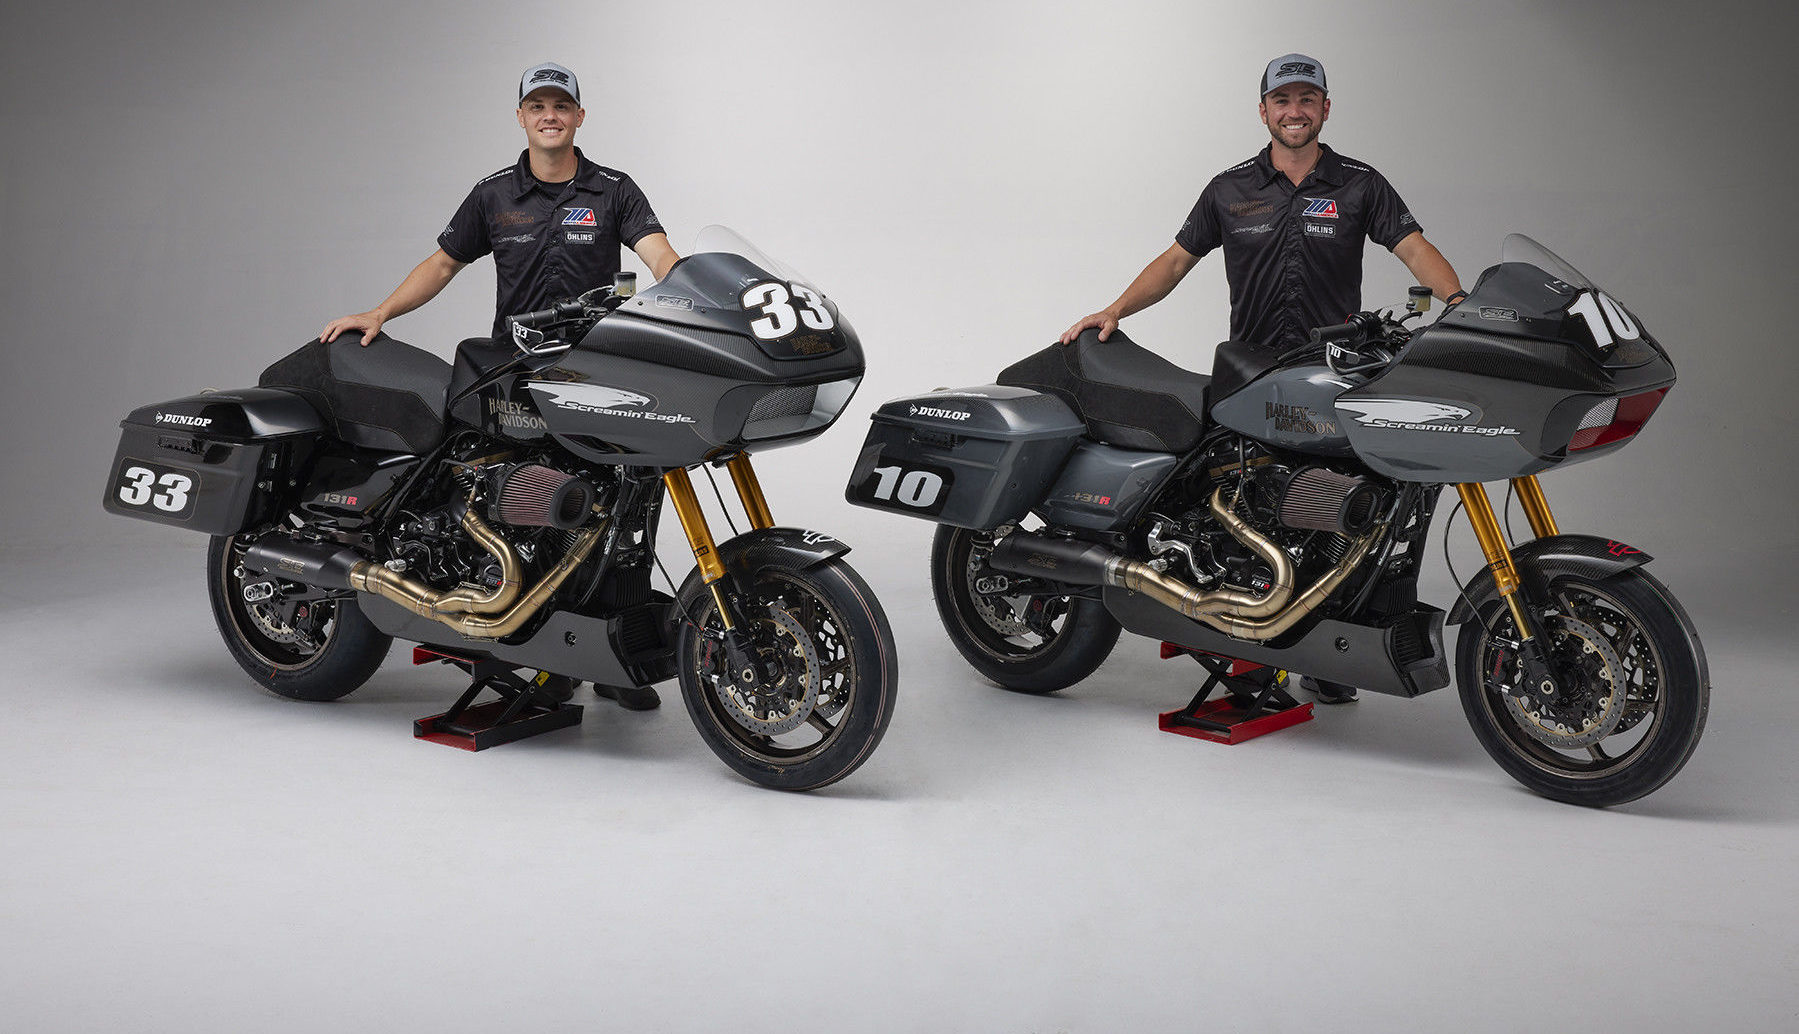 Travis Wyman (right) is joining older brother Kyle Wyman (left) on the factory Harley-Davidson Screamin' Eagle team for the MotoAmerica King of the Baggers race at Road America. Photo courtesy Harley-Davidson.